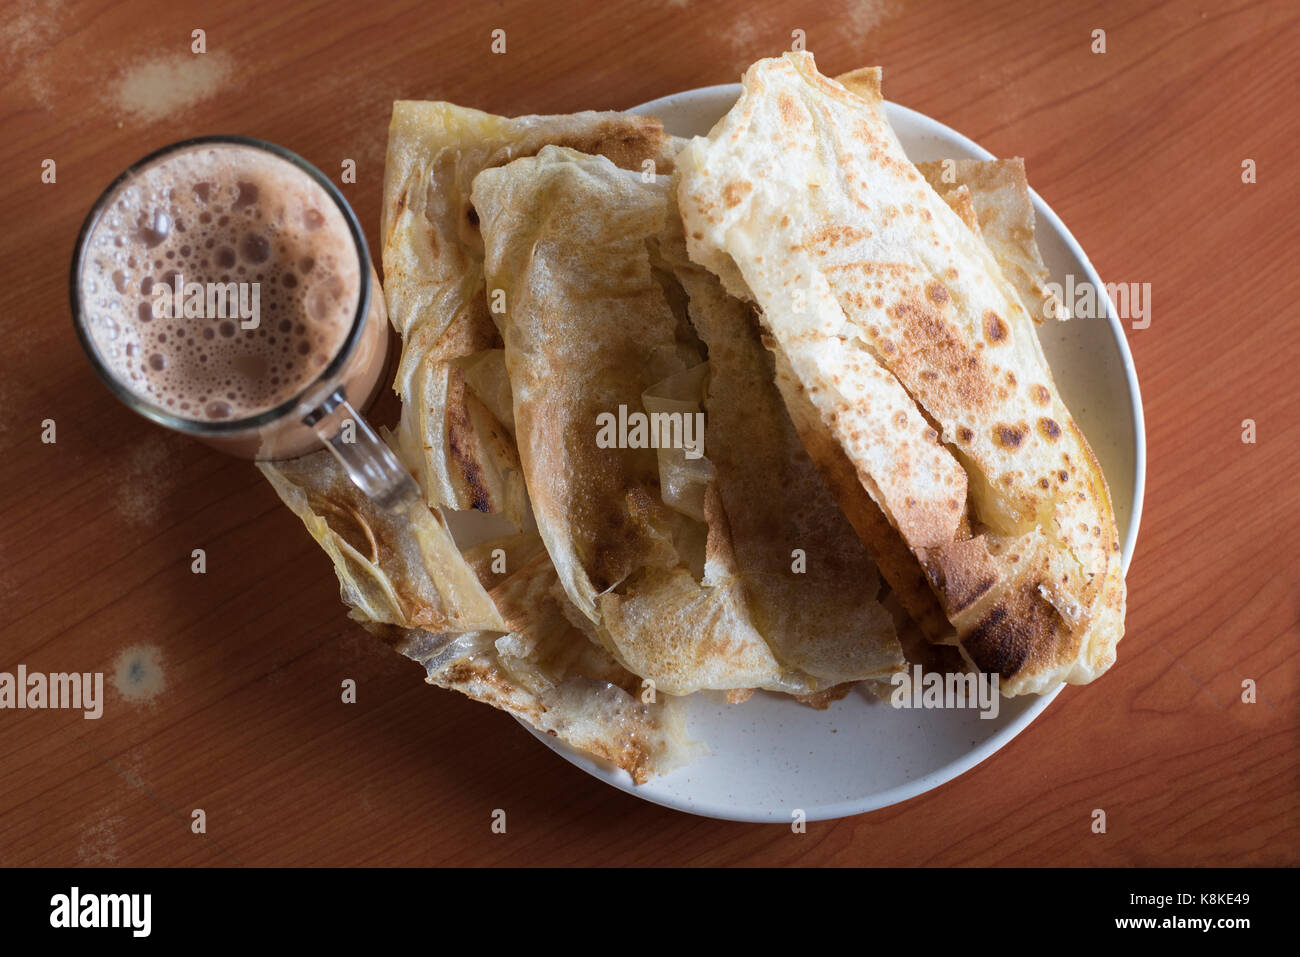 flatbread and tea with milk.also called roti canai and teh tarik by malaysian people.its a famous and popular meal in malaysia.everyday food Stock Photo